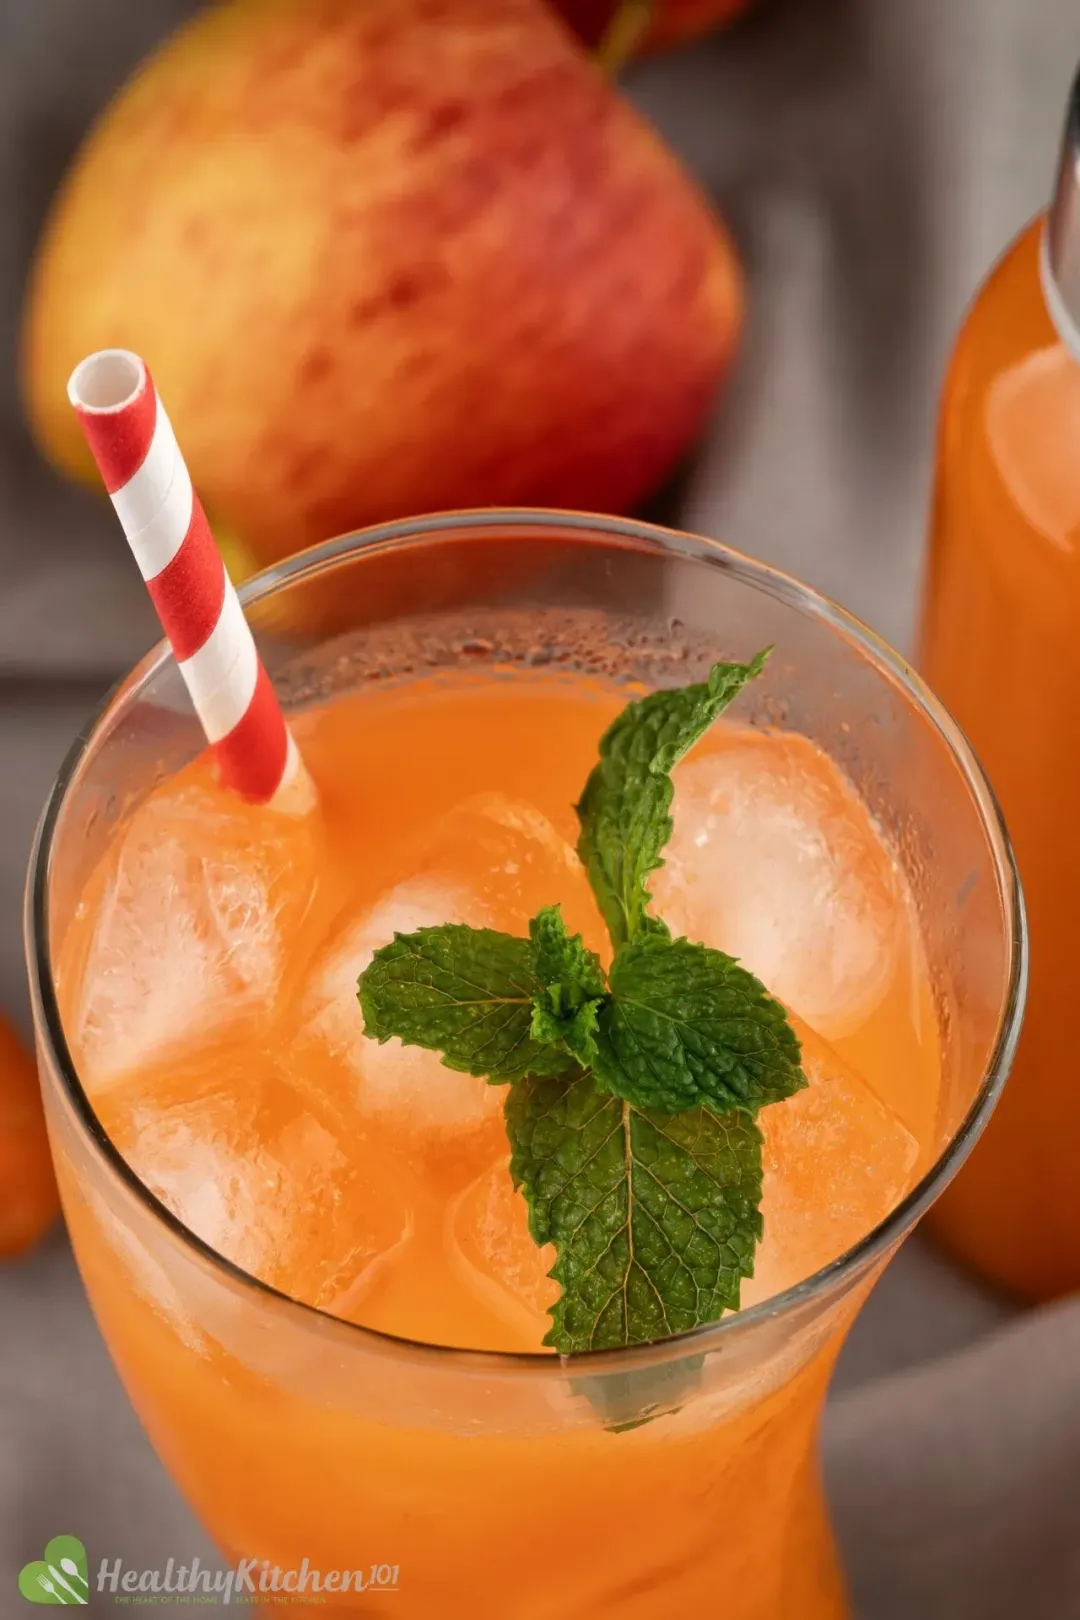 A close up shot of an iced carrot drink garnished with mints and with a red striped straw dunked in